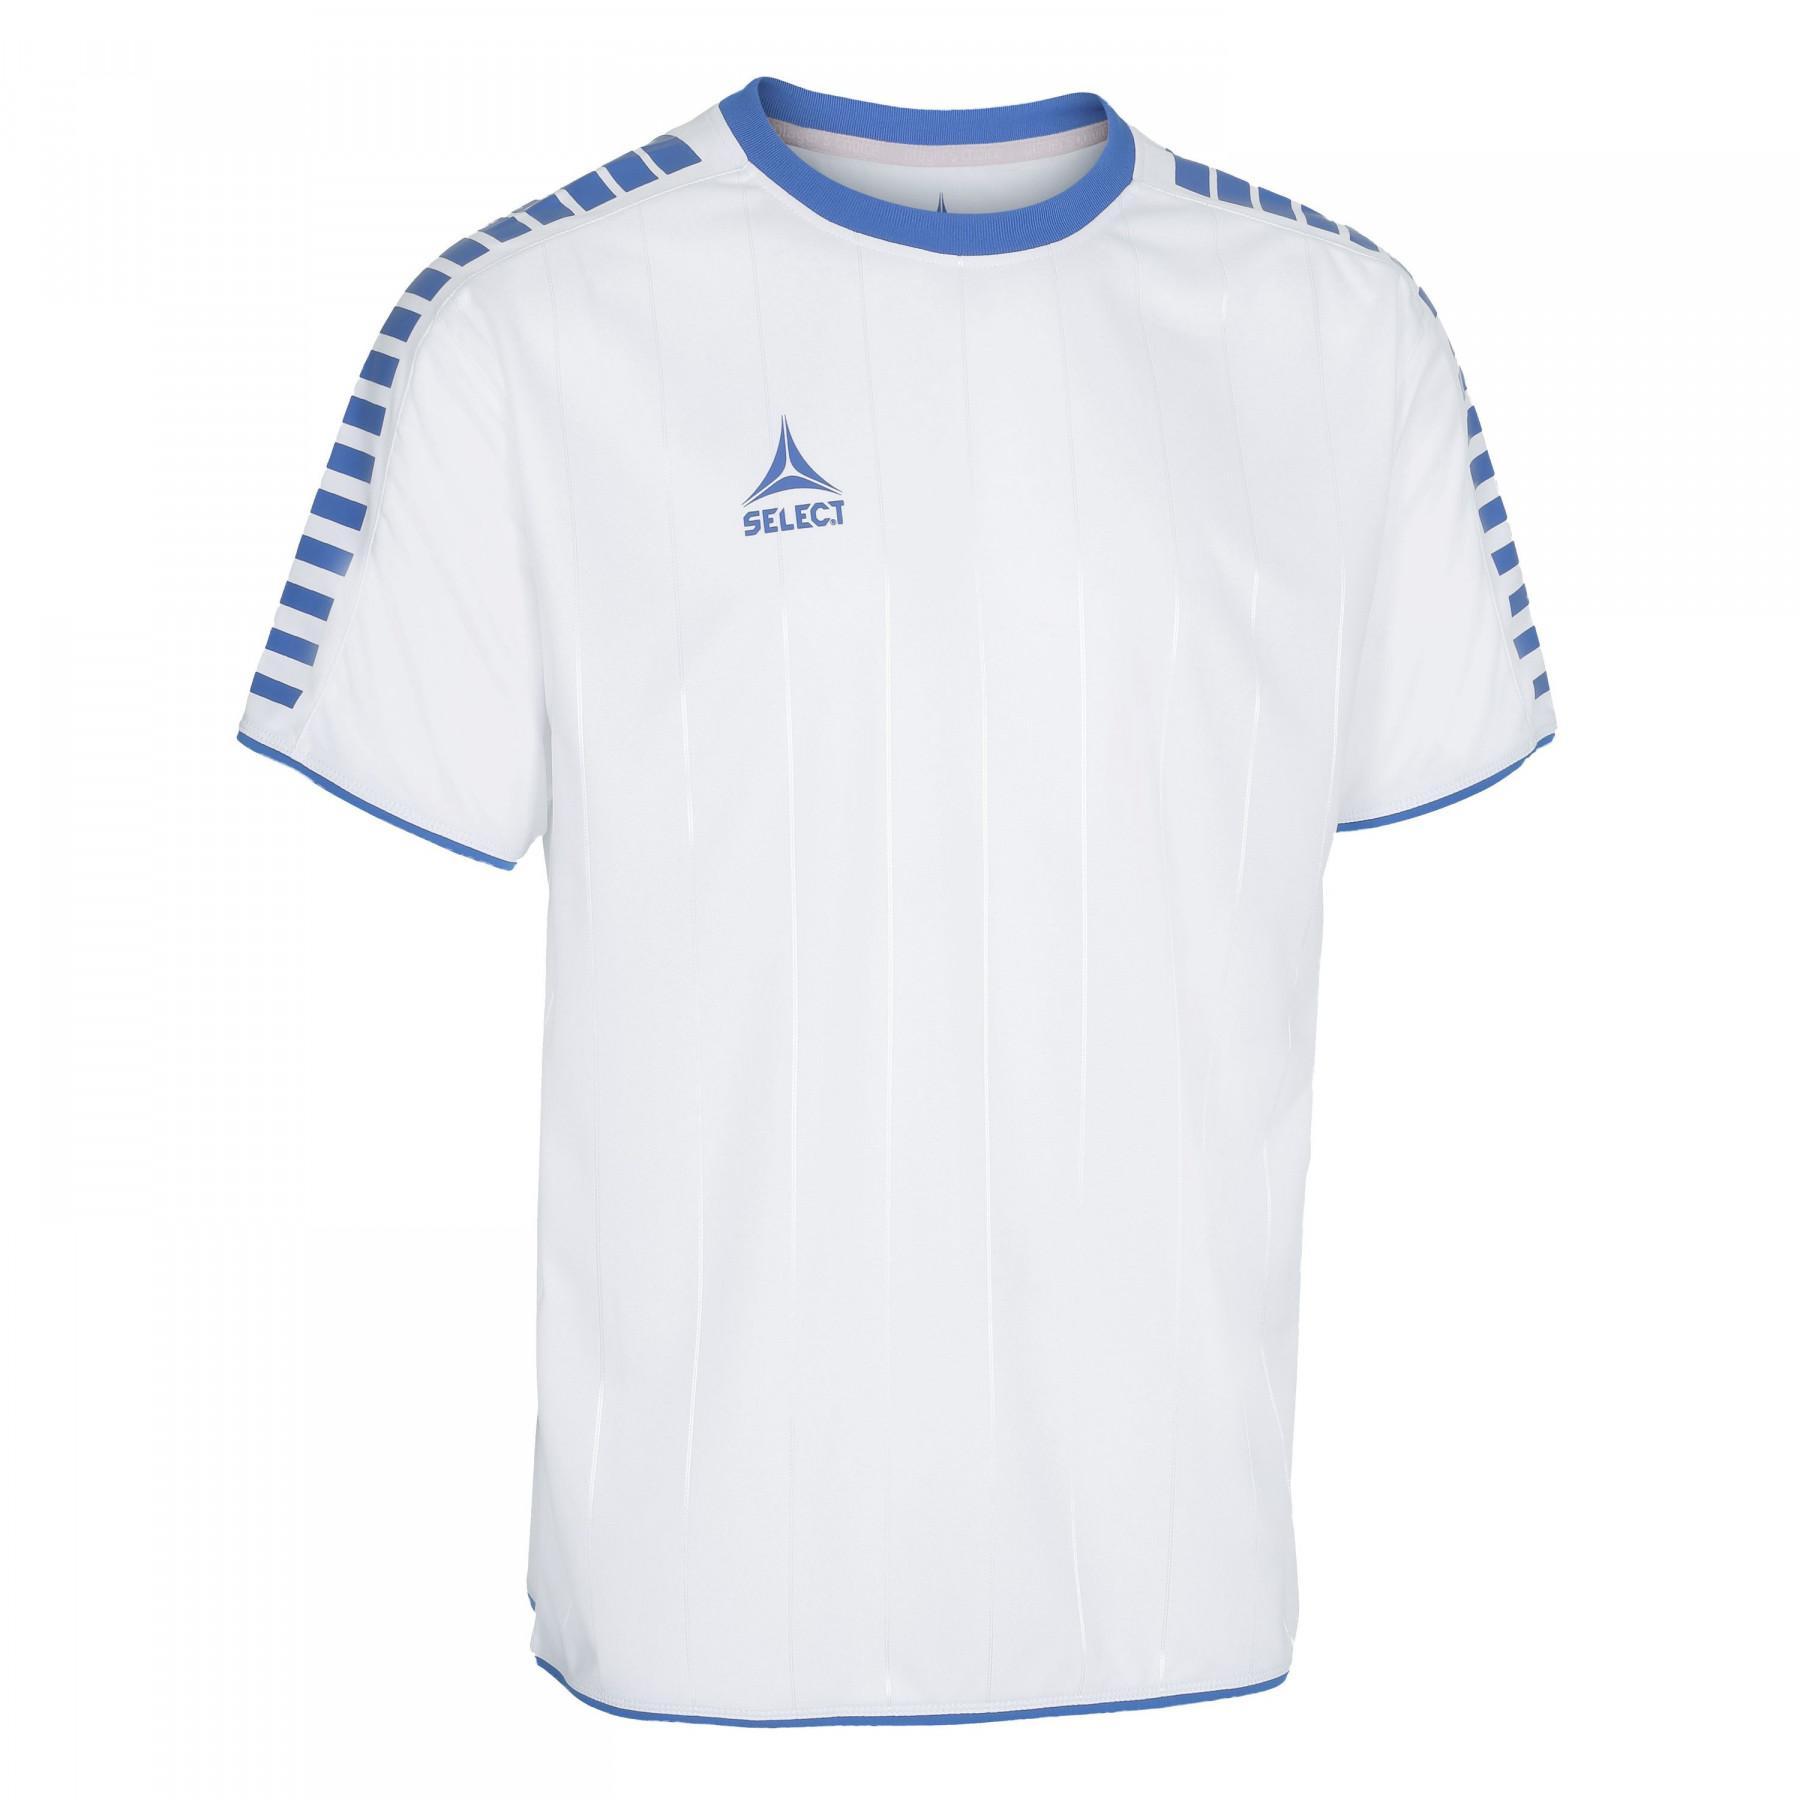 Children's jersey Select Argentina